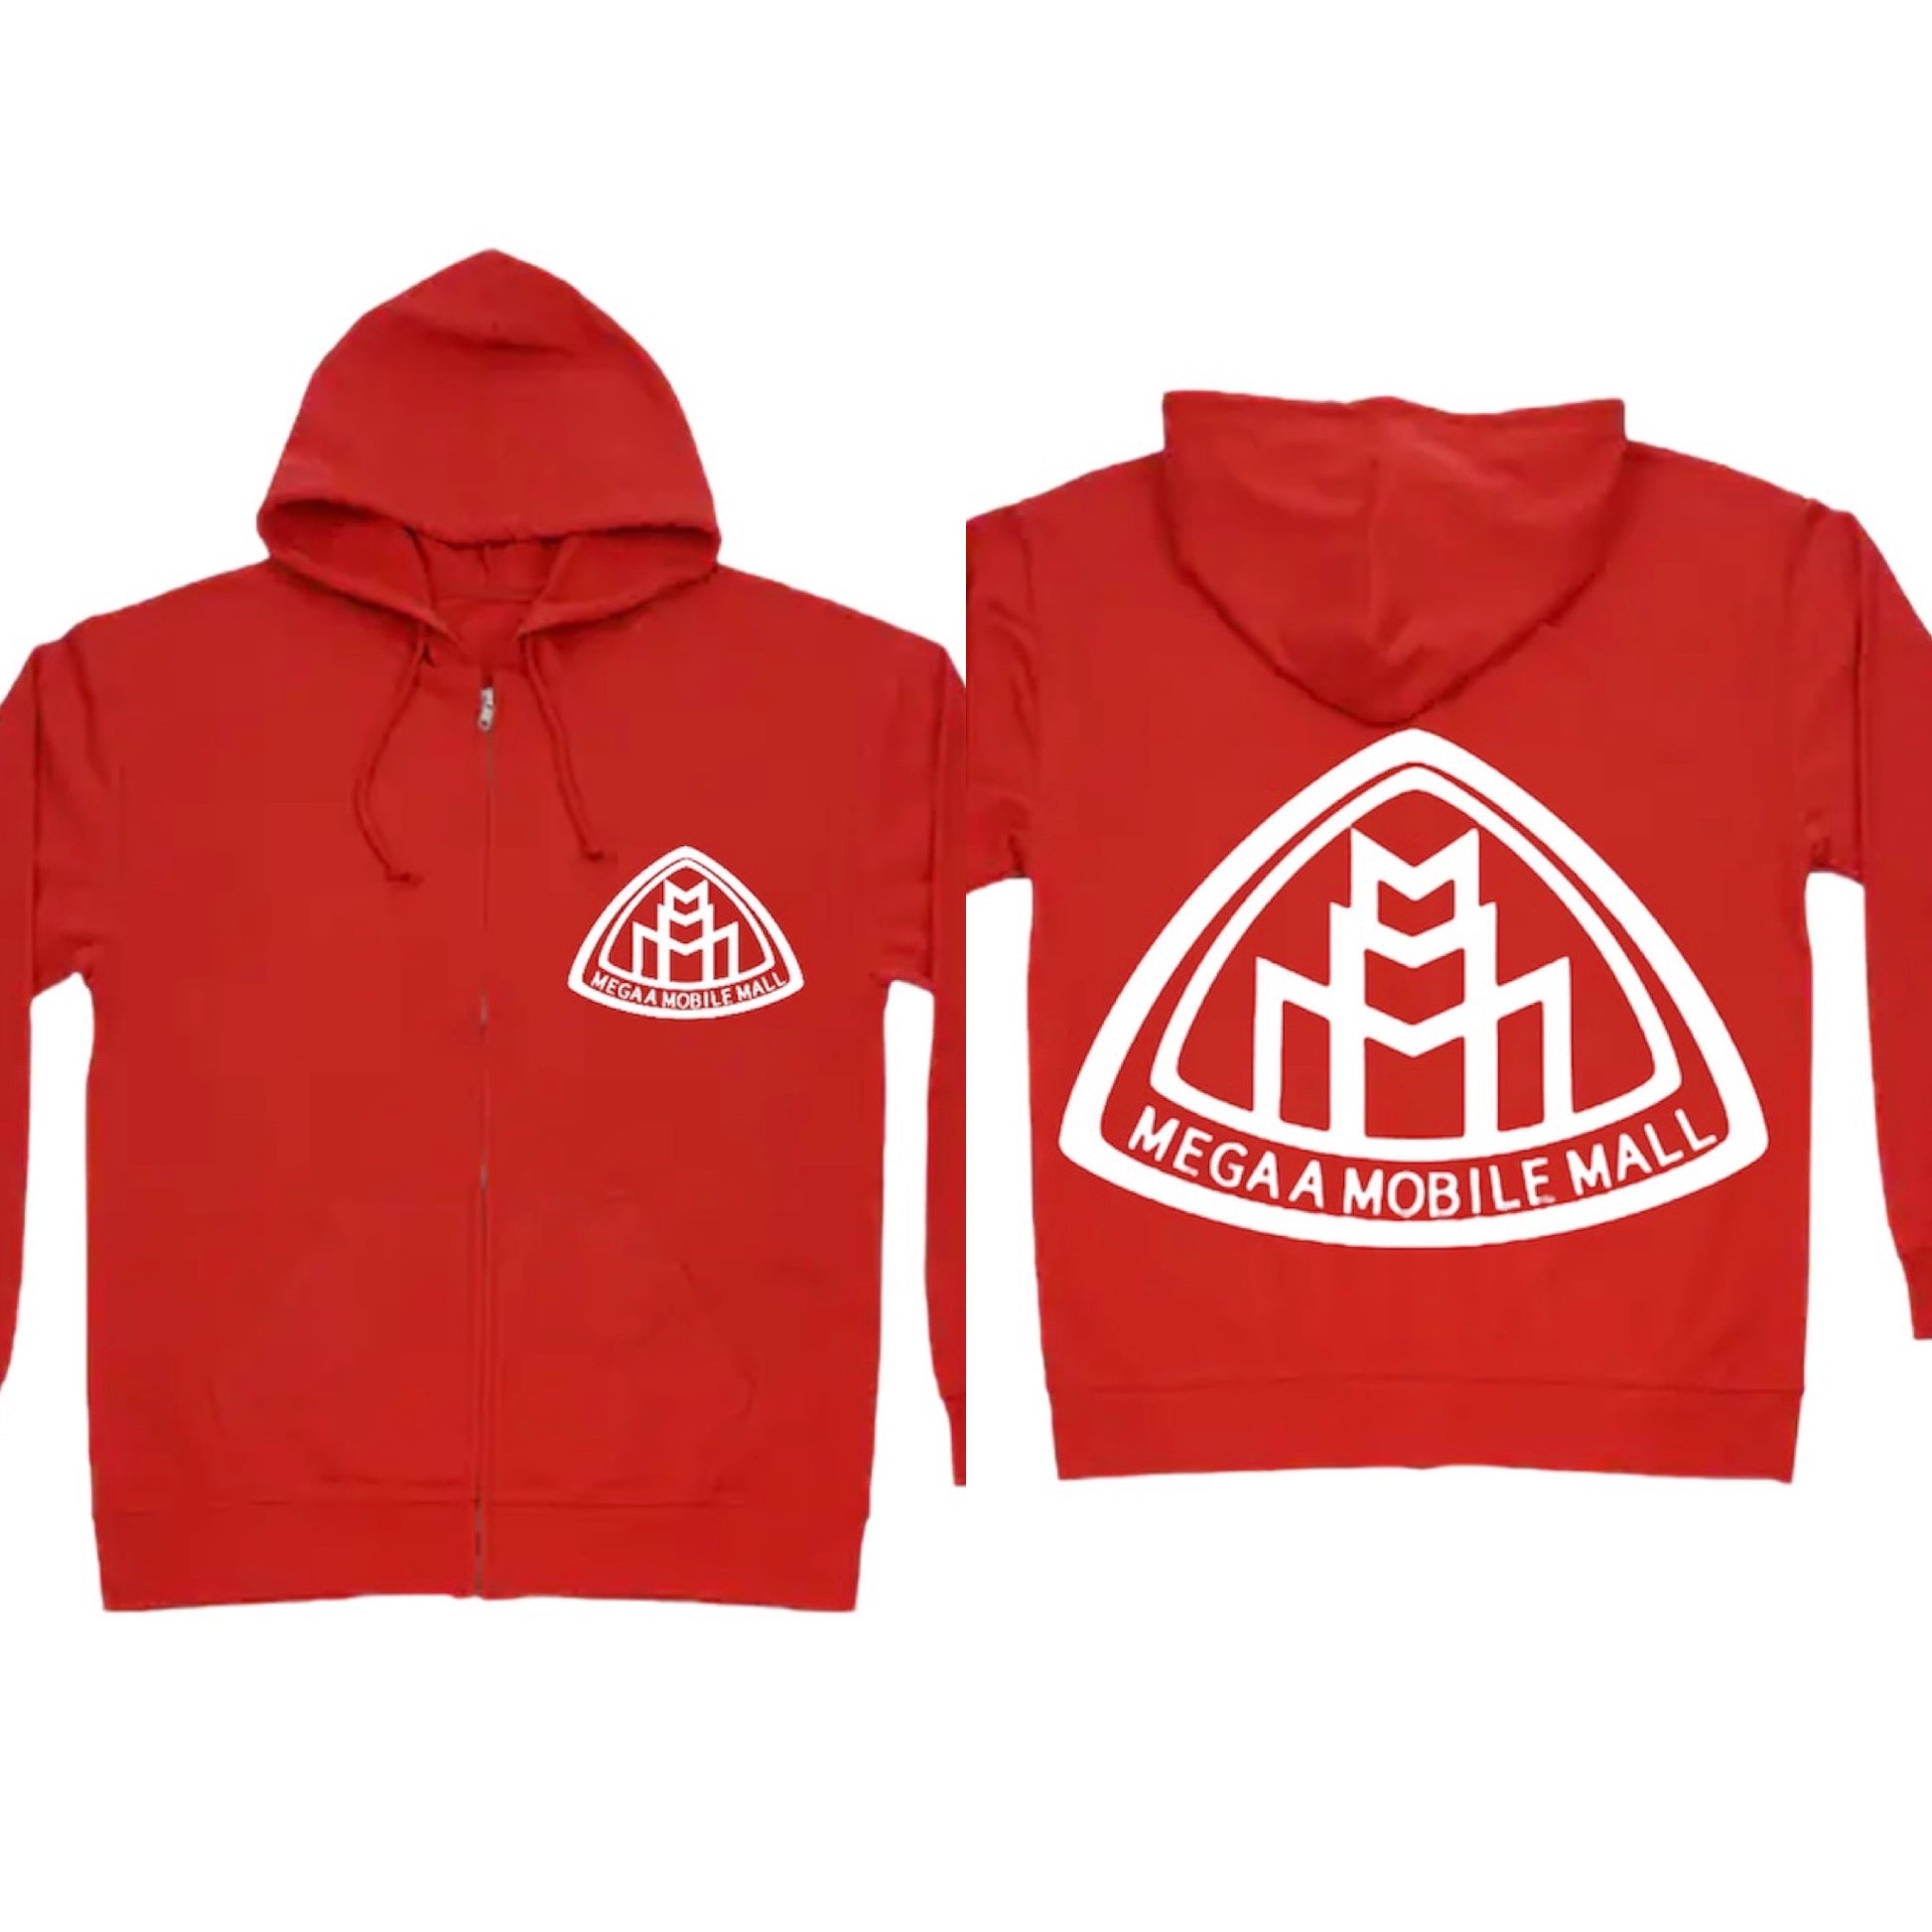 megaamobilemall red zip up hoodie with white logo